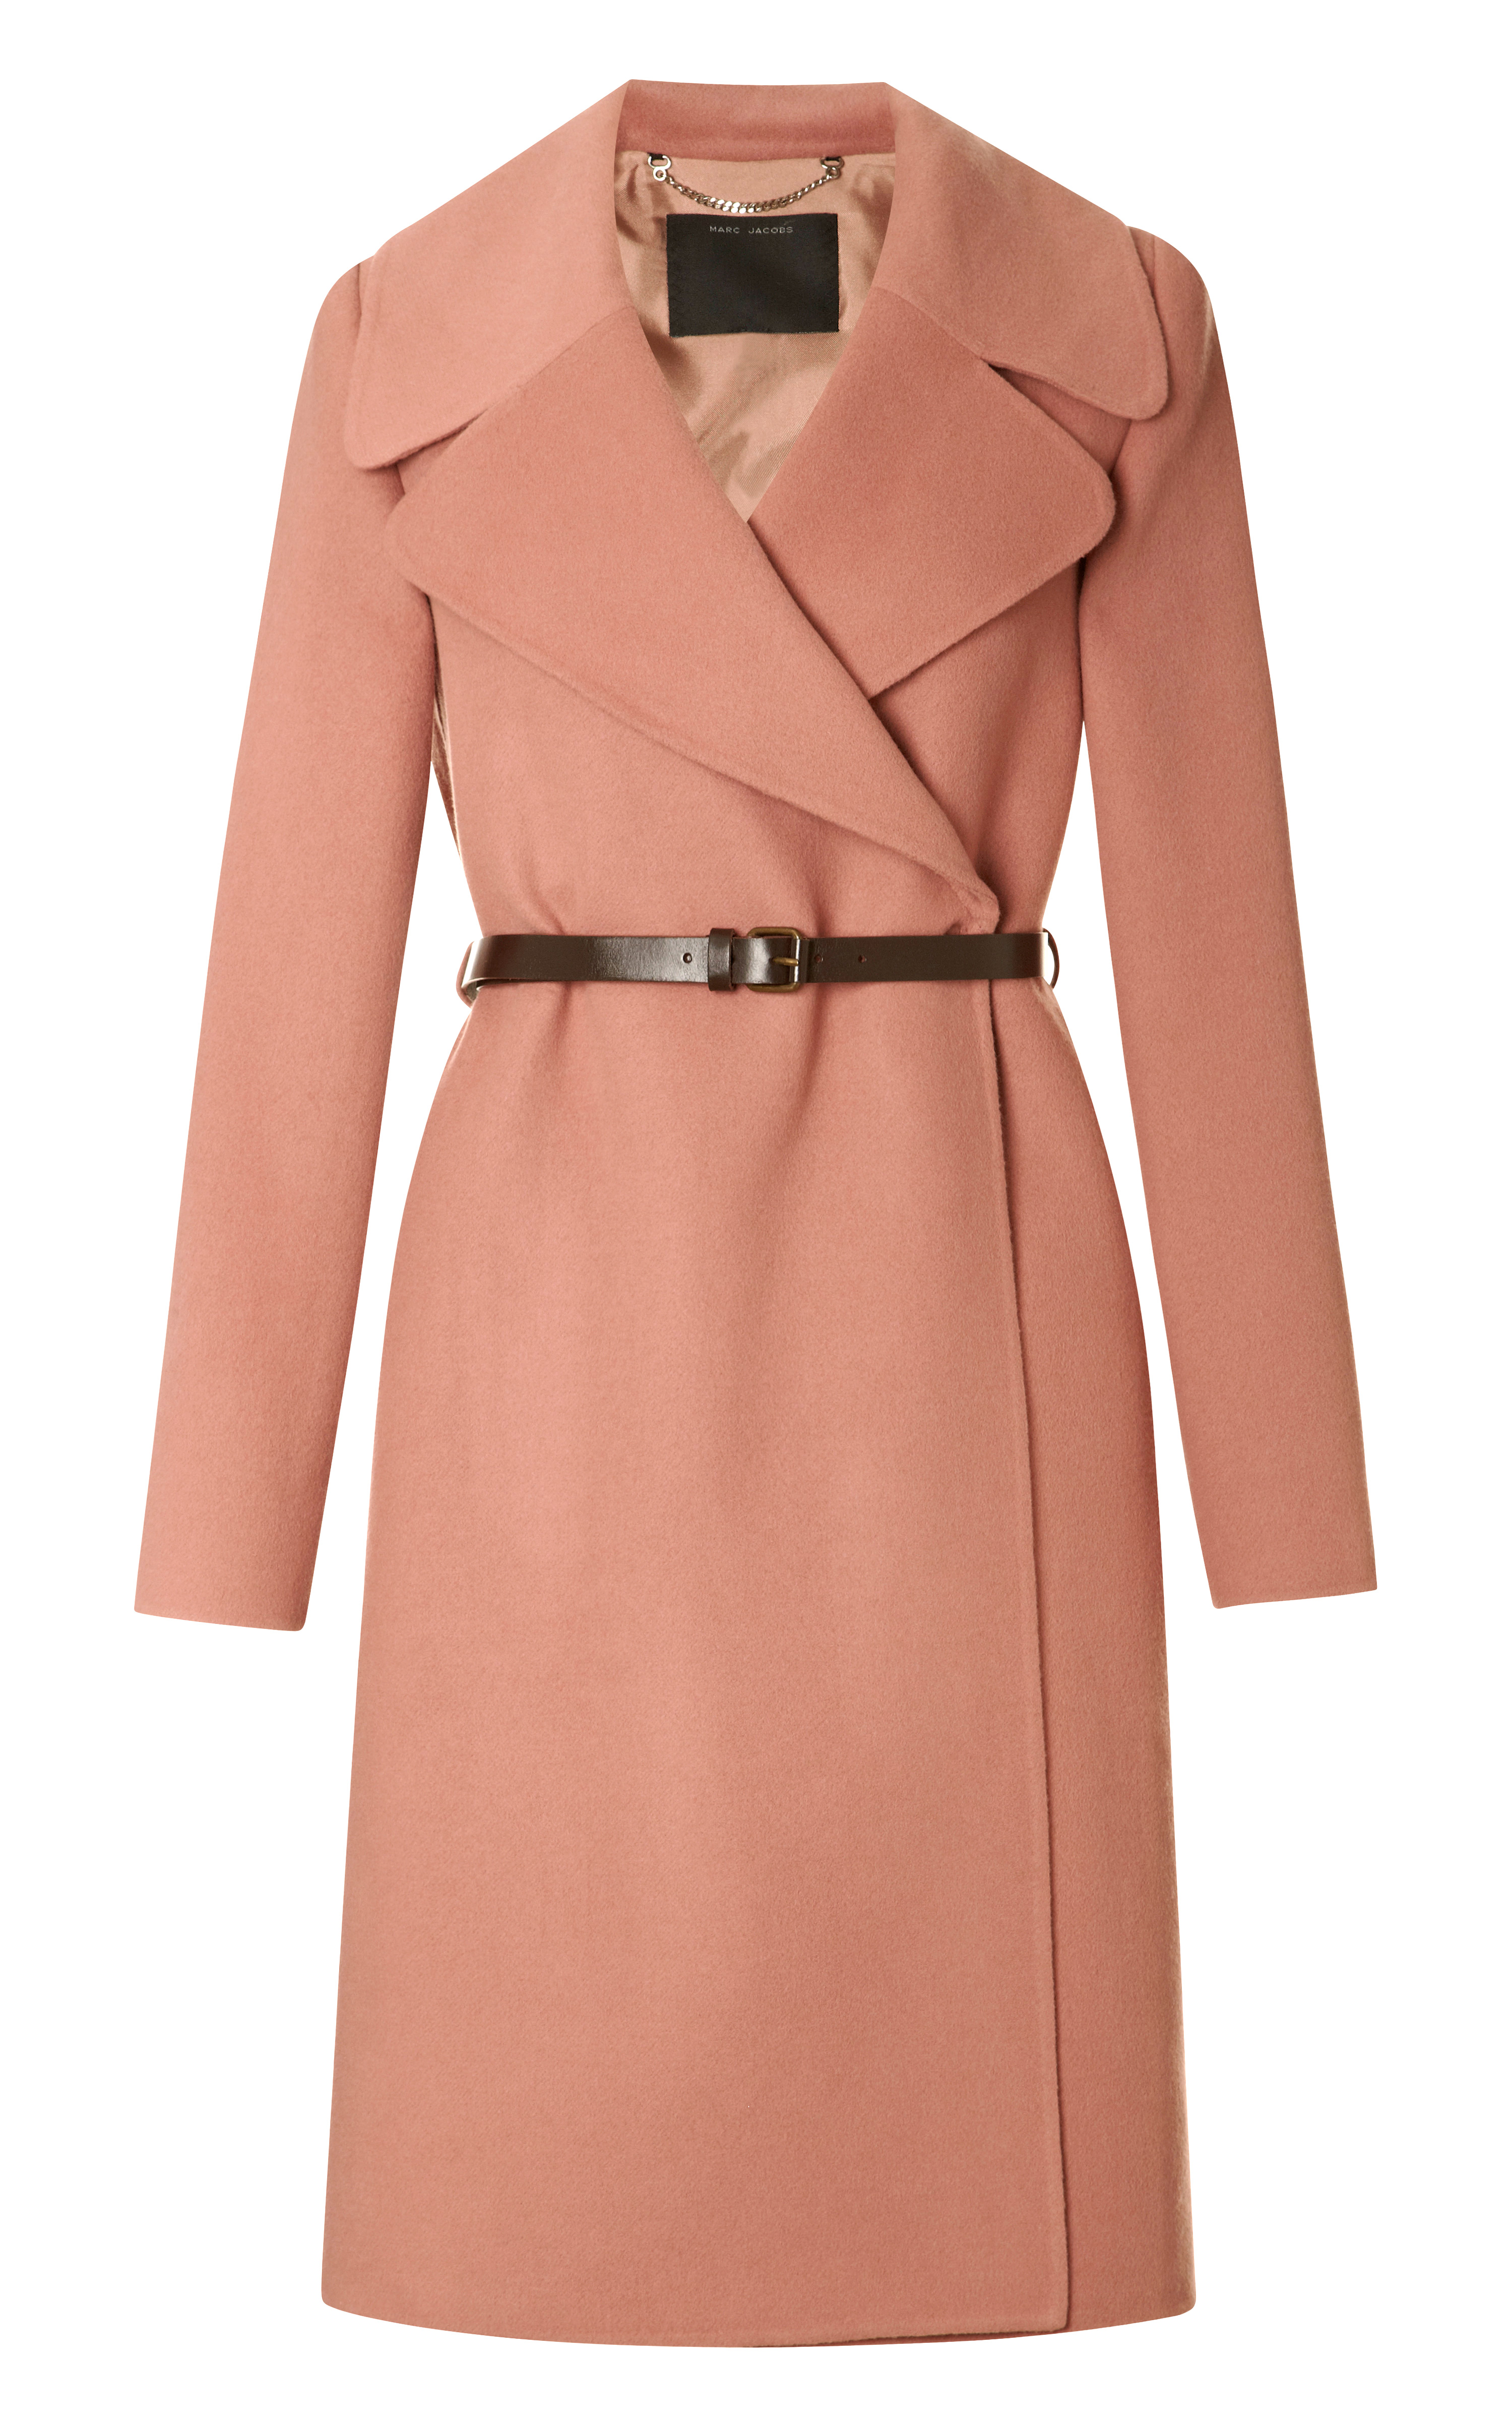 Lyst - Marc Jacobs Double Faced Cashmere Belted Coat in Pink